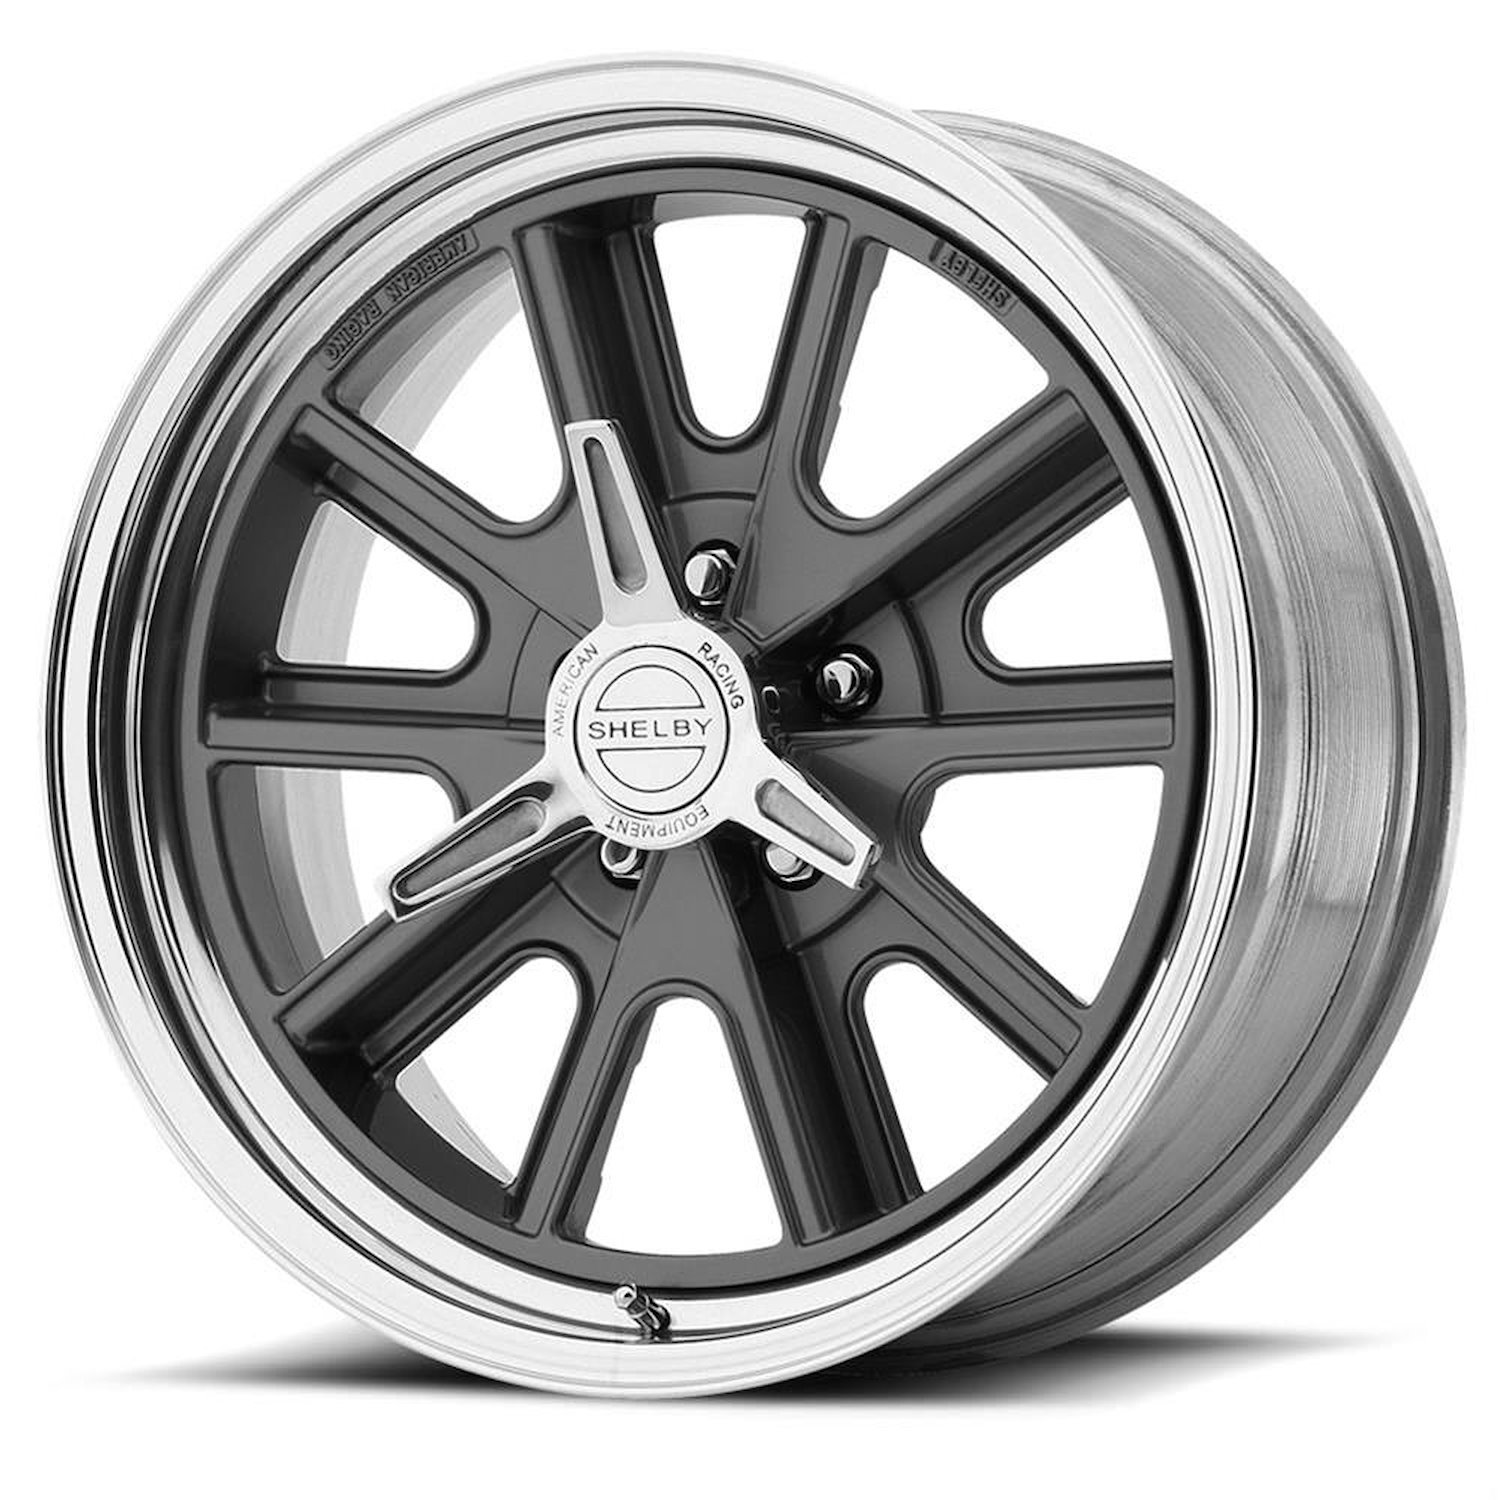 AMERICAN RACING 427 SHELBY COBRA TWO-PIECE MAG GRAY CENTER POLISHED BARREL 17 x 11 5x4.5 -32 4.74